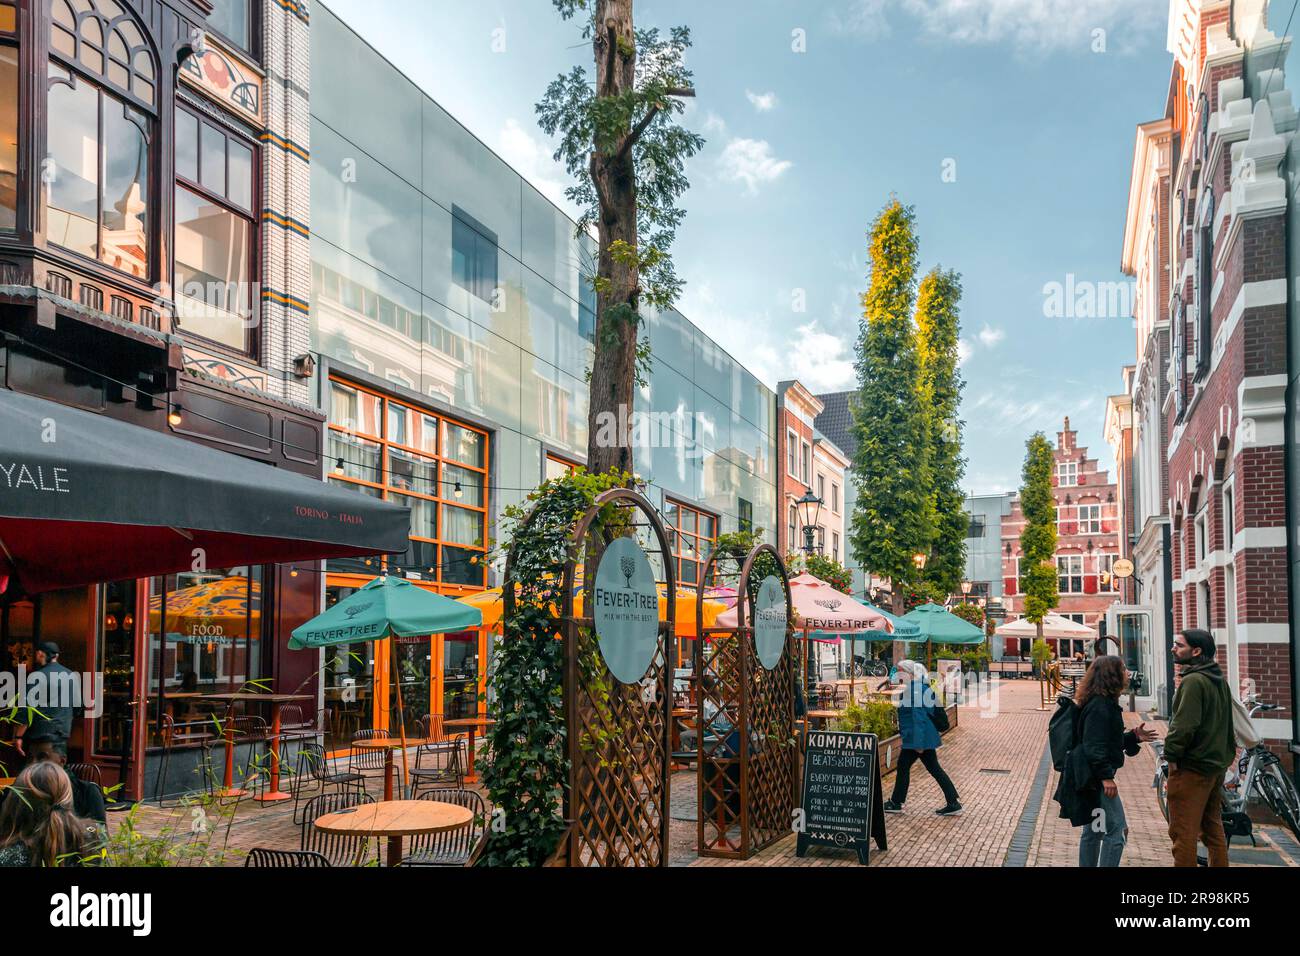 The Hague, Netherlands - OCT 7, 2021: Haagsche Bluf is a small shopping mall in The Hague, Netherlands. The renewed area merges modern and typical Dut Stock Photo